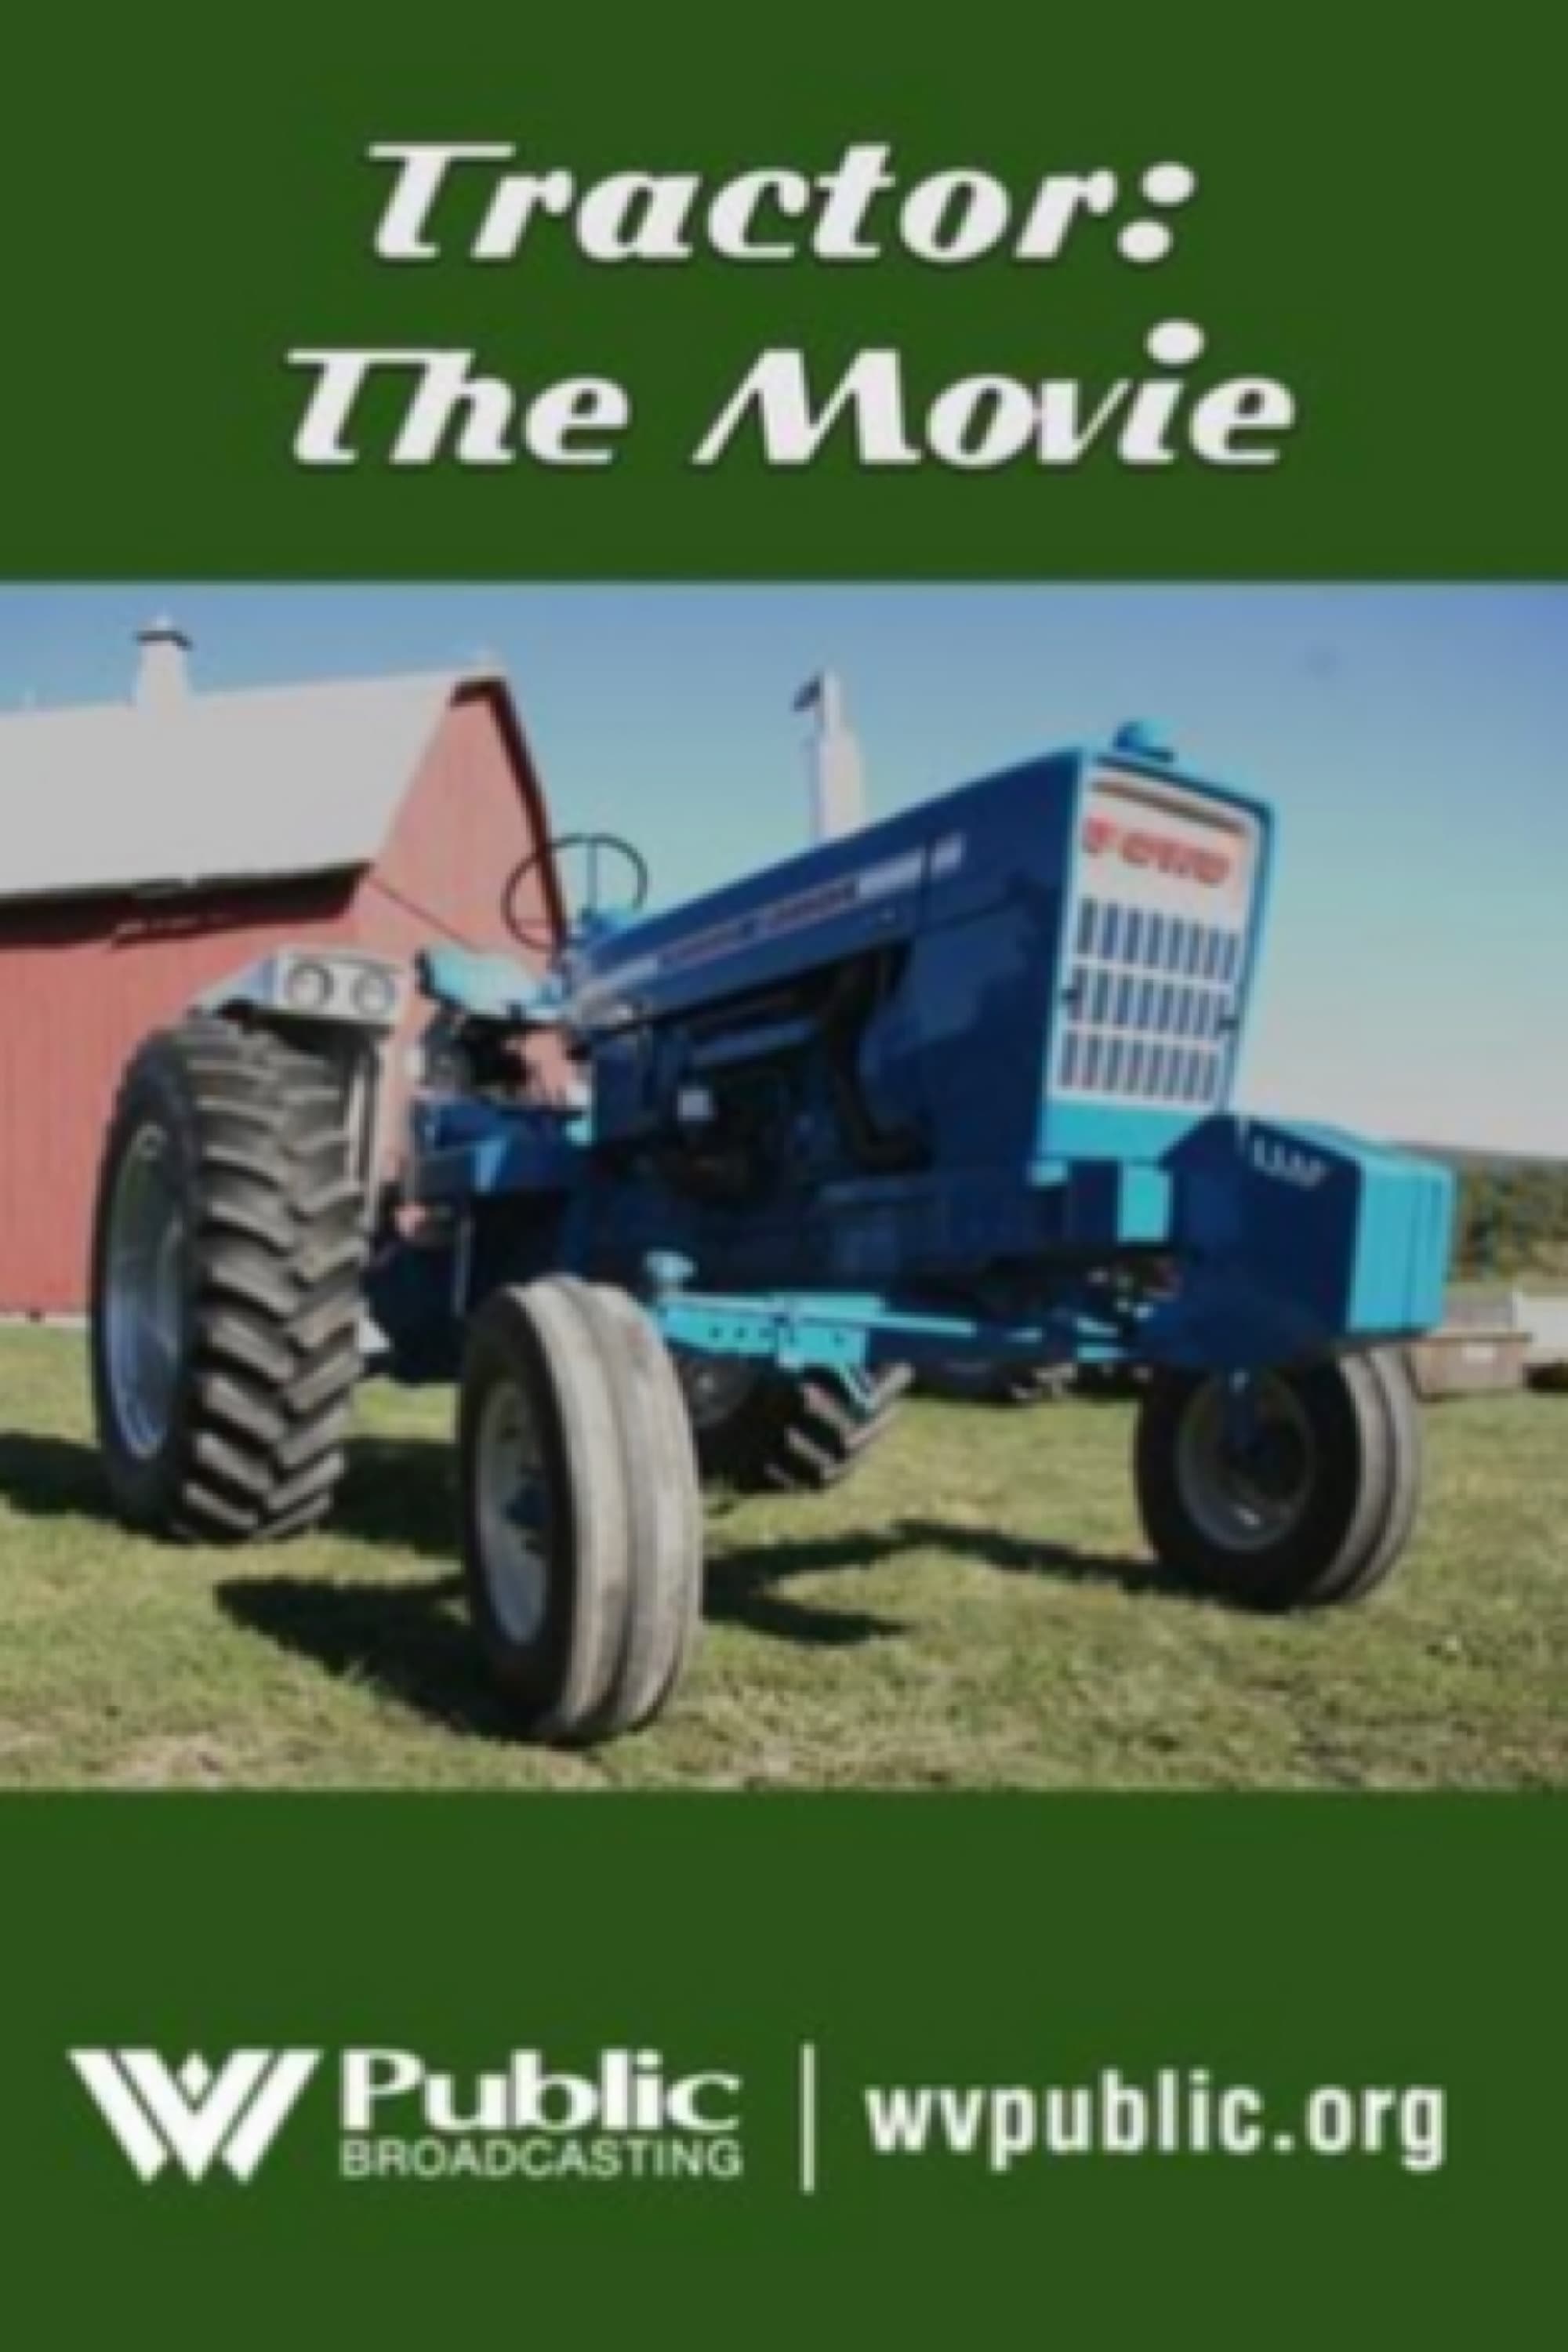 Tractor: The Movie